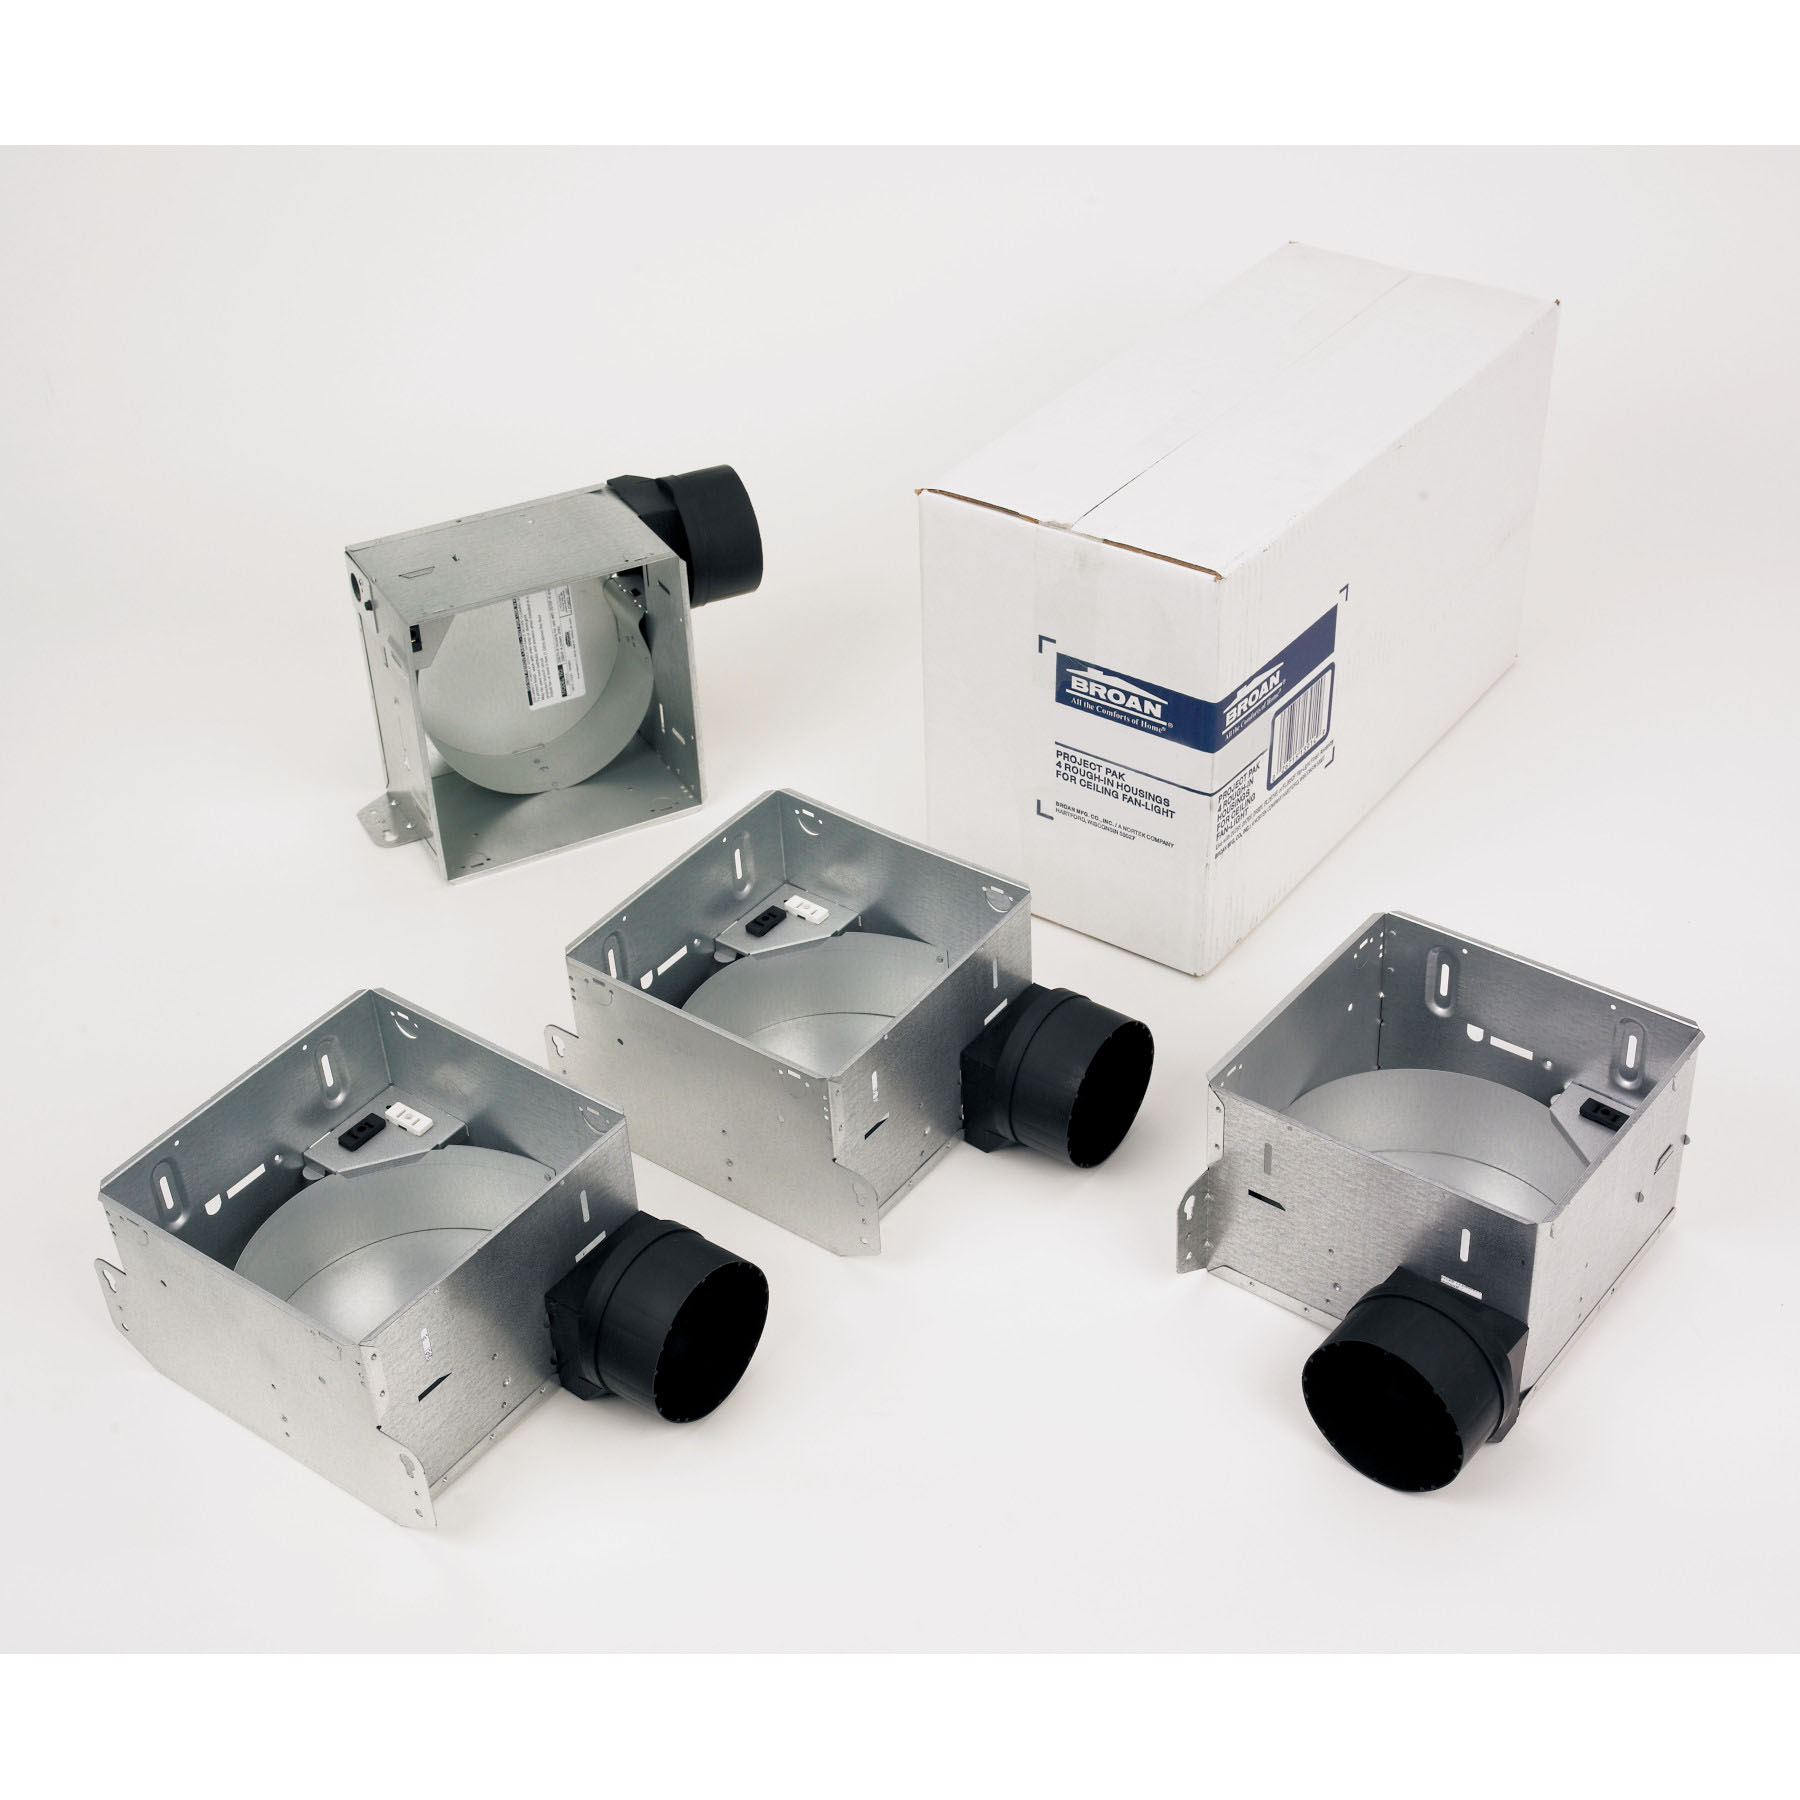 **DISCONTINUED** Broan® Ventilation Fan/Light Housing Pack, 0.3 sones **DISCONTINUED**